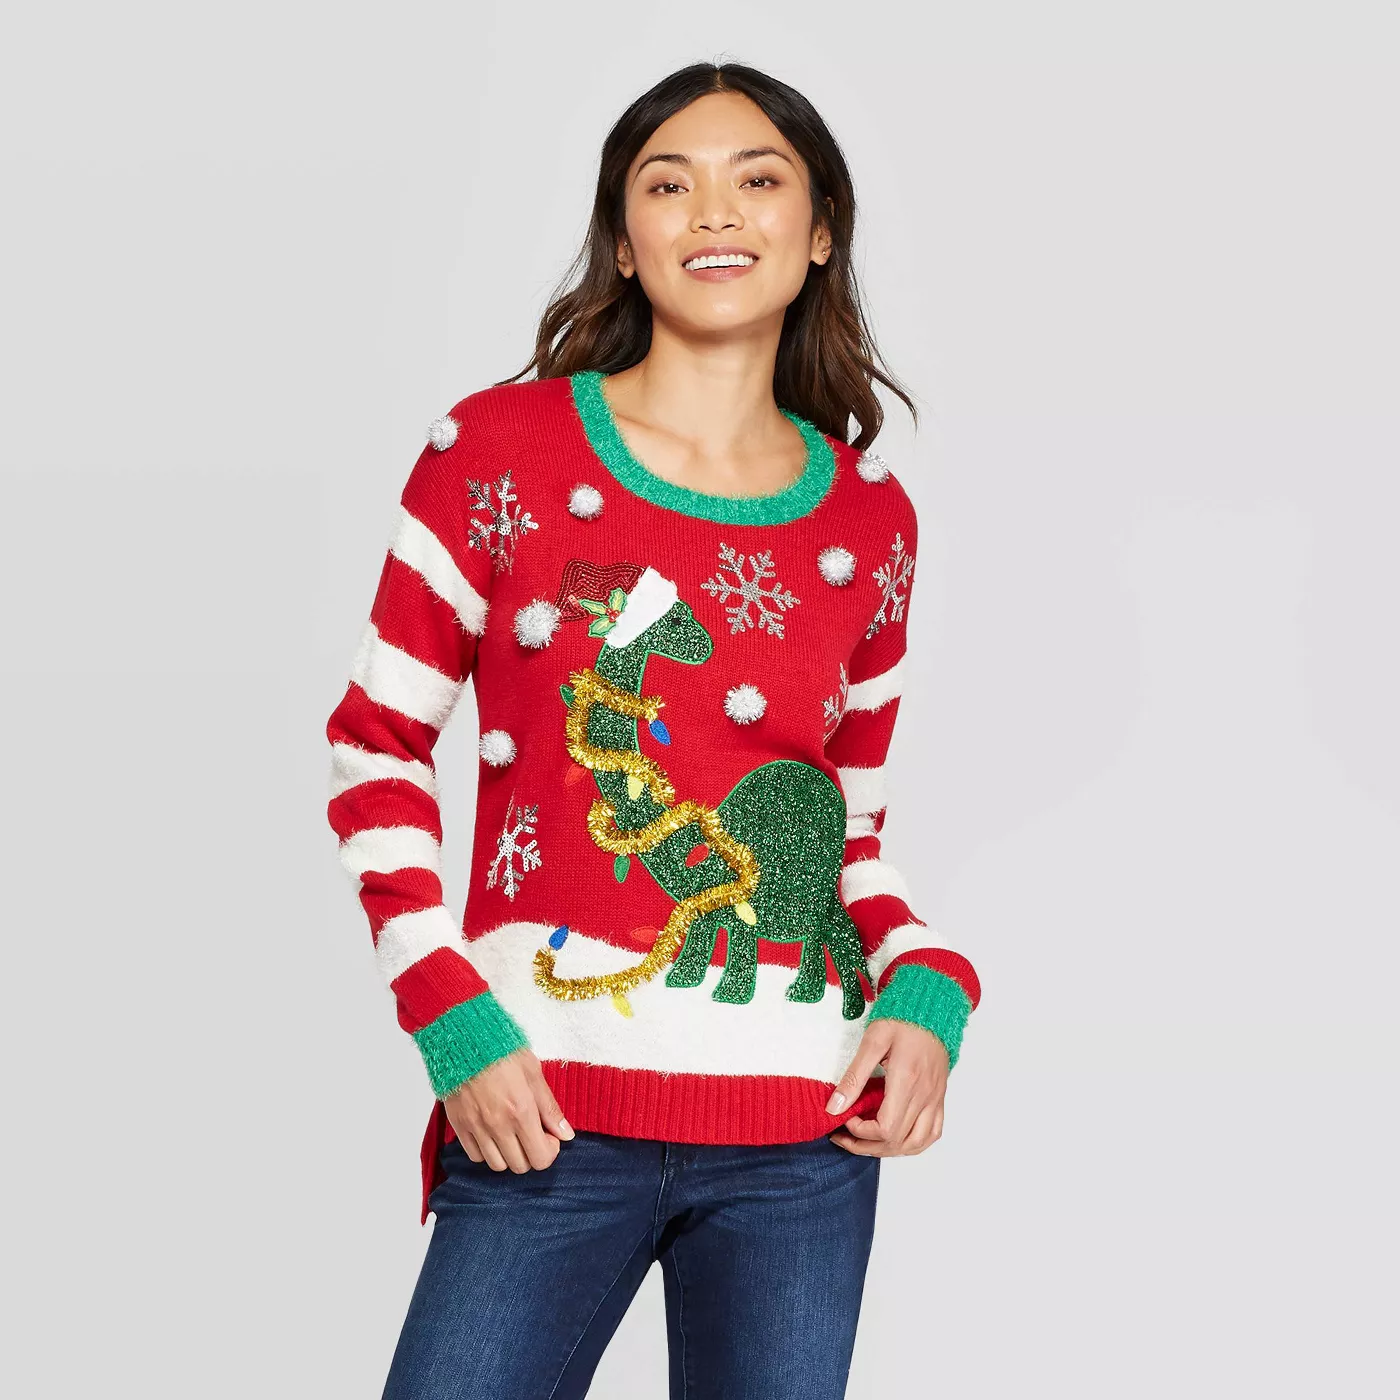 Women's Dinosaur Long Sleeve Ugly Holiday Sweater - 33 Degrees (Juniors') - Red - image 1 of 2